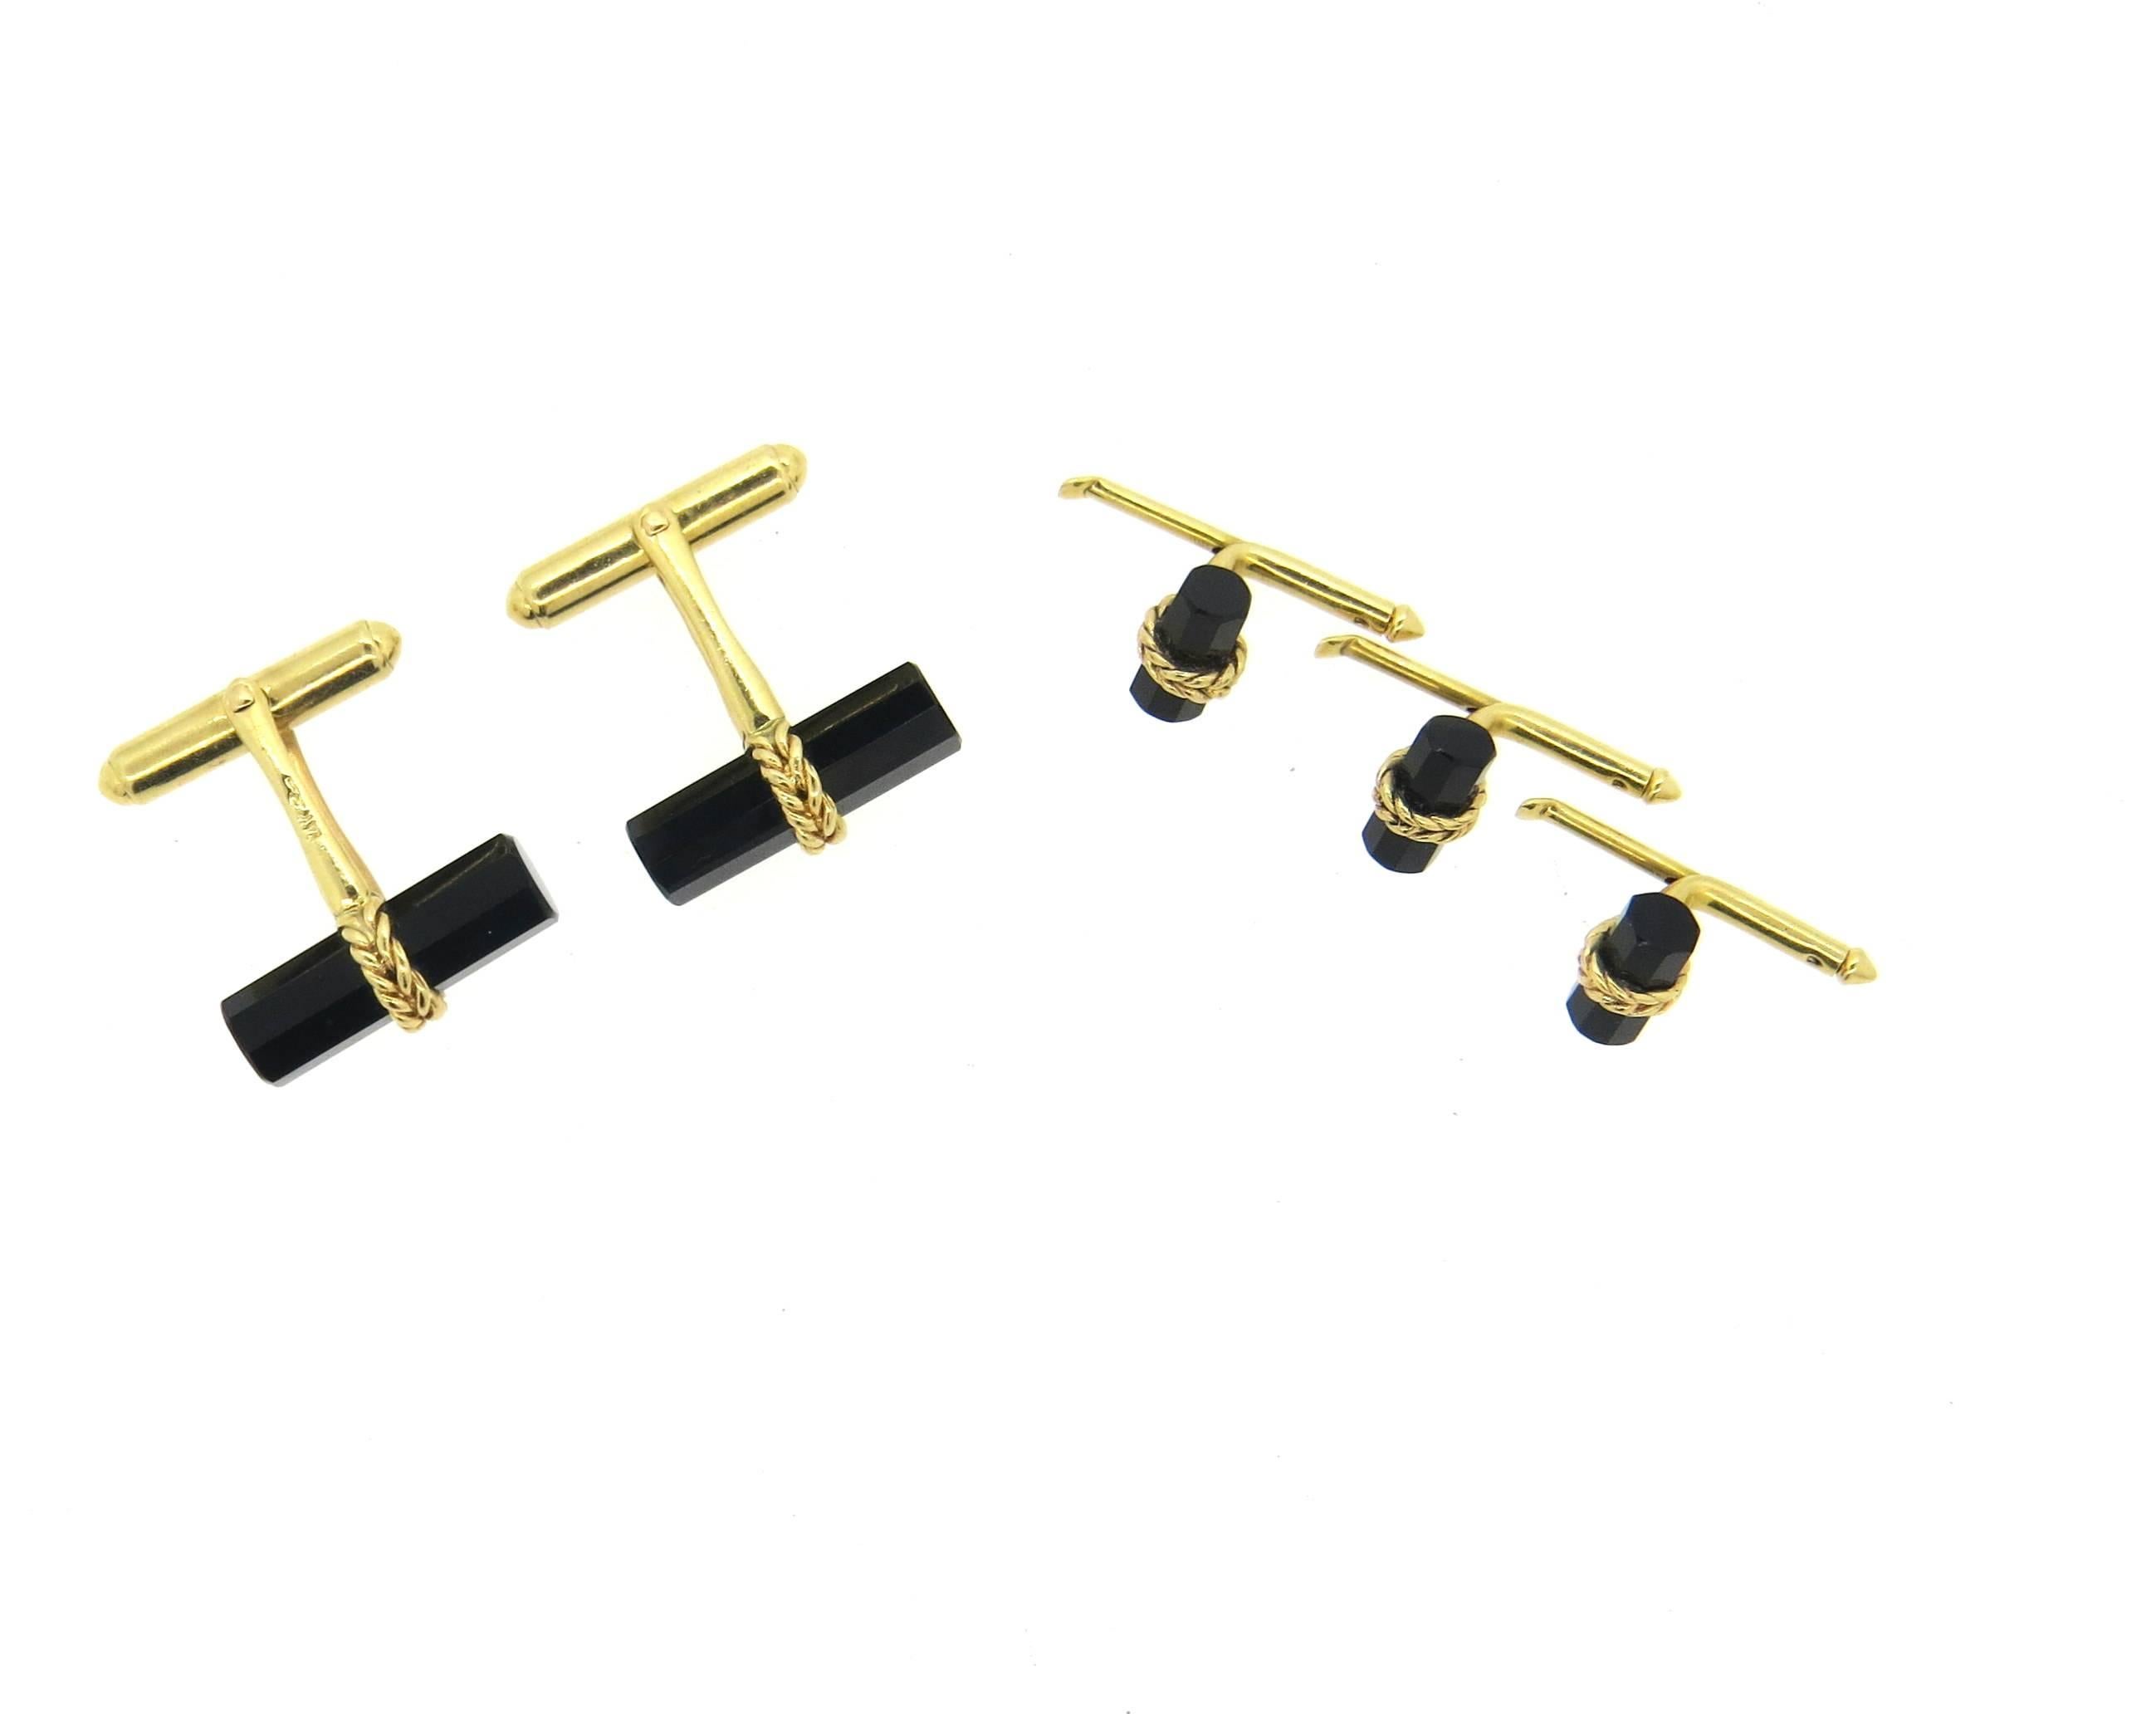 Vintage mid Century 14k yellow gold dress set, crafted by Larter & Son, including a par of cufflinks and three shirt studs, all decorated with faceted onyx top. Cufflink measures 20mm x 9mm, stud - 10mm x 6mm.Marked with maker's mark and 14k. 